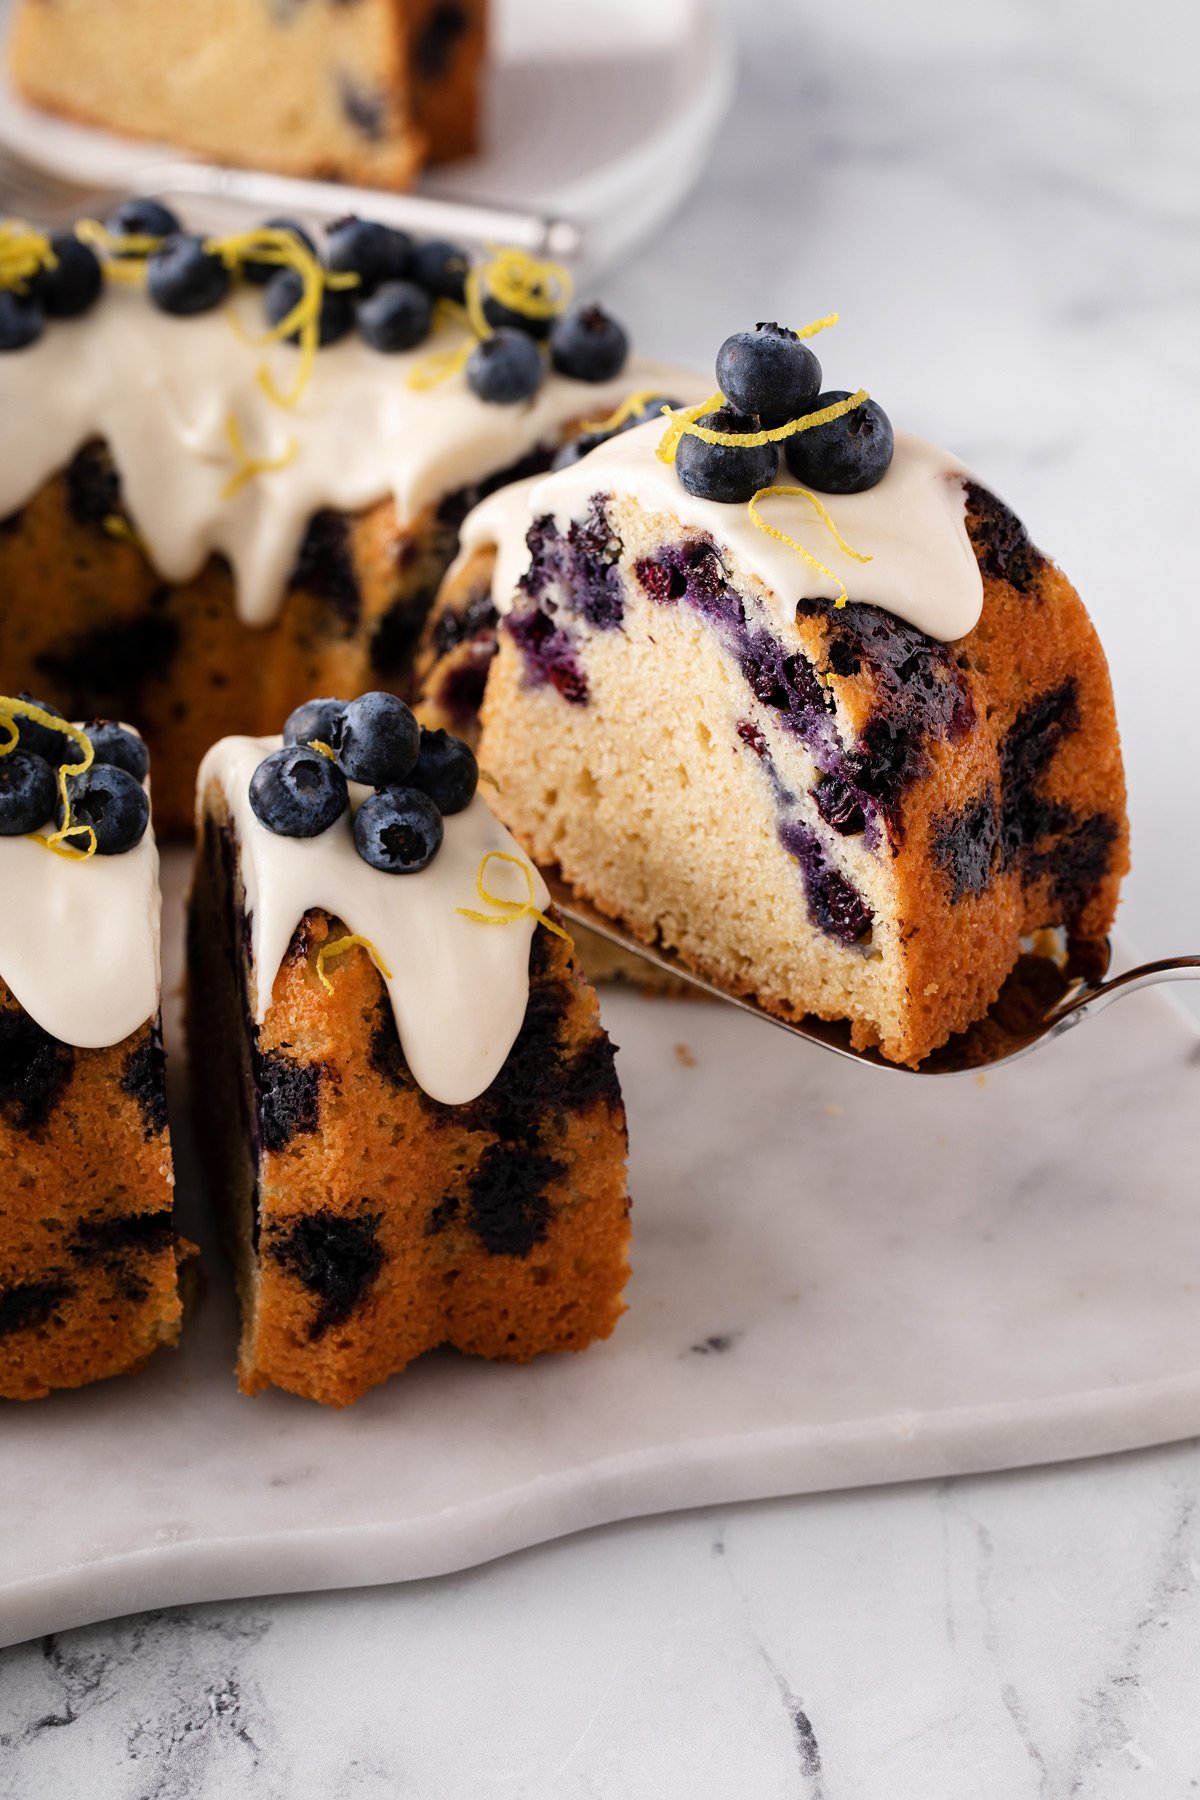 Cake server lifting a slice of cake out of a lemon-blueberry bundt cake that is topped with cream cheese glaze.